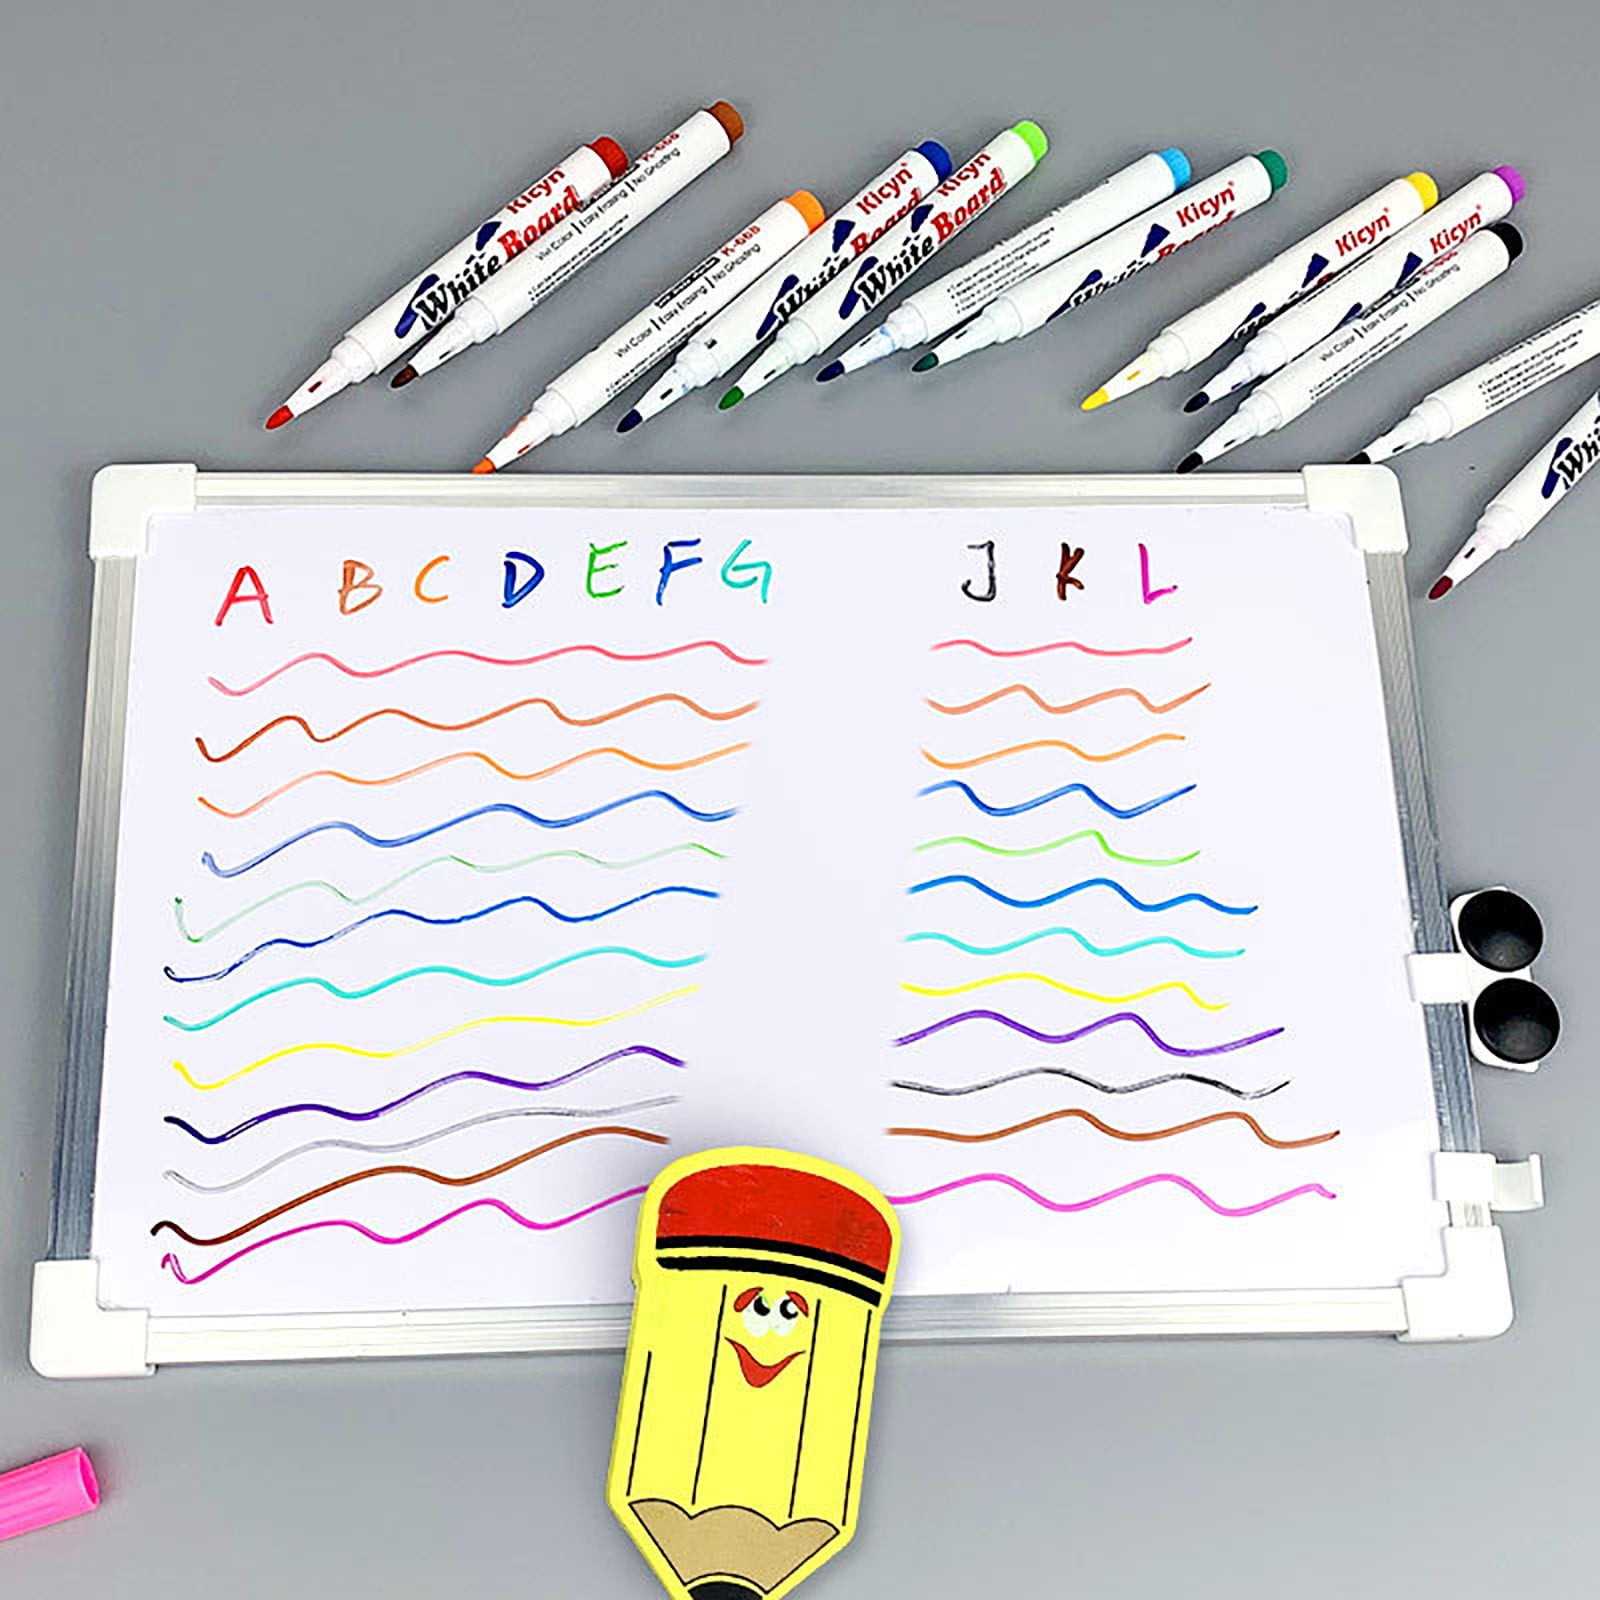 Magical Water Painting Markers For Kids Montessori Floating Doodle Pens For  Early Education And Drawing Whiteboard Marker Toy 230803 From Cong05, $13.4